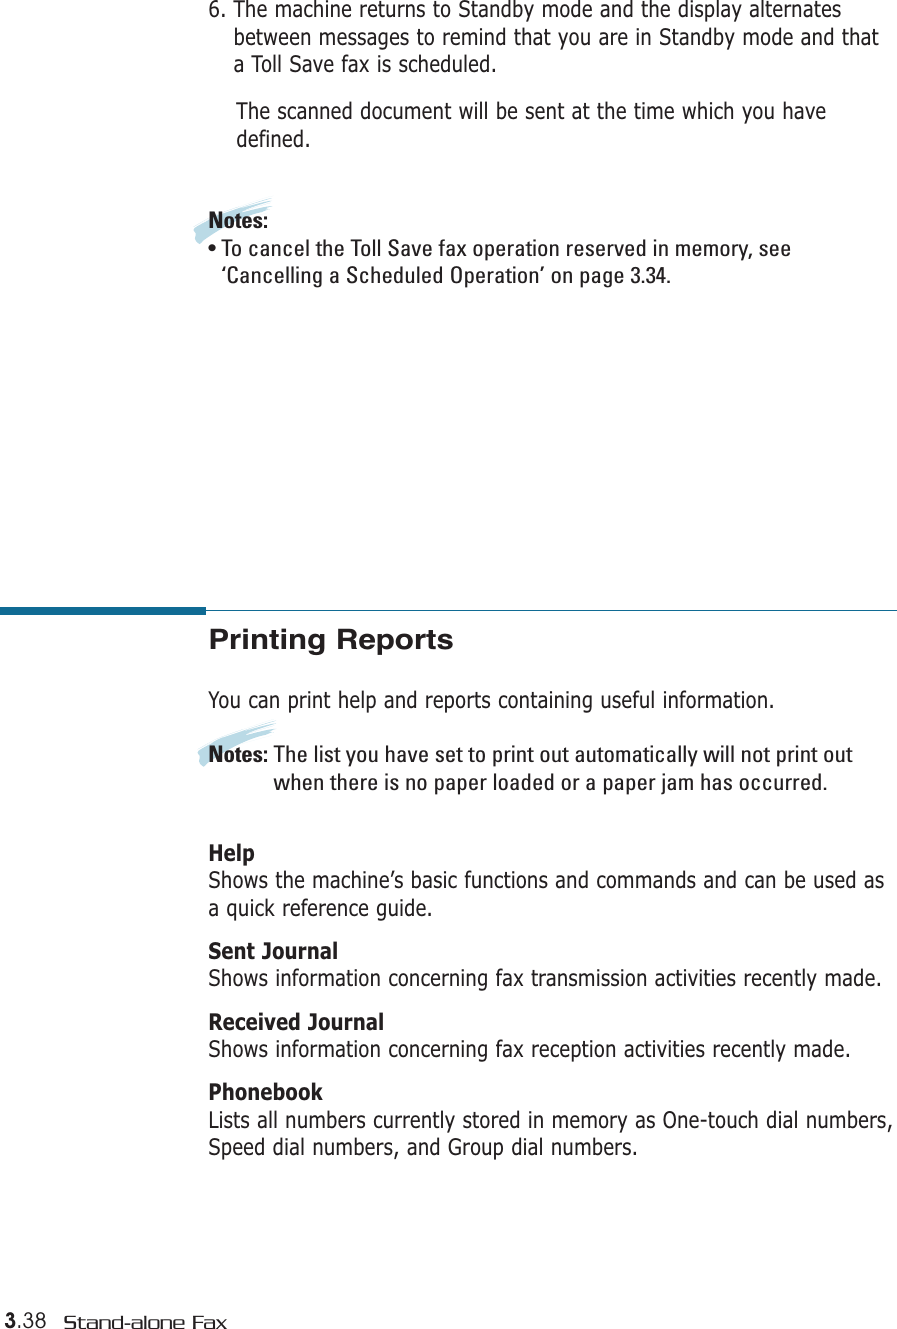 3.38 Stand-alone FaxPrinting ReportsYou can print help and reports containing useful information. Notes: The list you have set to print out automatically will not print outwhen there is no paper loaded or a paper jam has occurred.HelpShows the machine’s basic functions and commands and can be used asa quick reference guide. Sent JournalShows information concerning fax transmission activities recently made. Received JournalShows information concerning fax reception activities recently made.  PhonebookLists all numbers currently stored in memory as One-touch dial numbers,Speed dial numbers, and Group dial numbers. 6. The machine returns to Standby mode and the display alternatesbetween messages to remind that you are in Standby mode and thata Toll Save fax is scheduled.The scanned document will be sent at the time which you havedefined.Notes:• To cancel the Toll Save fax operation reserved in memory, see‘Cancelling a Scheduled Operation’ on page 3.34.